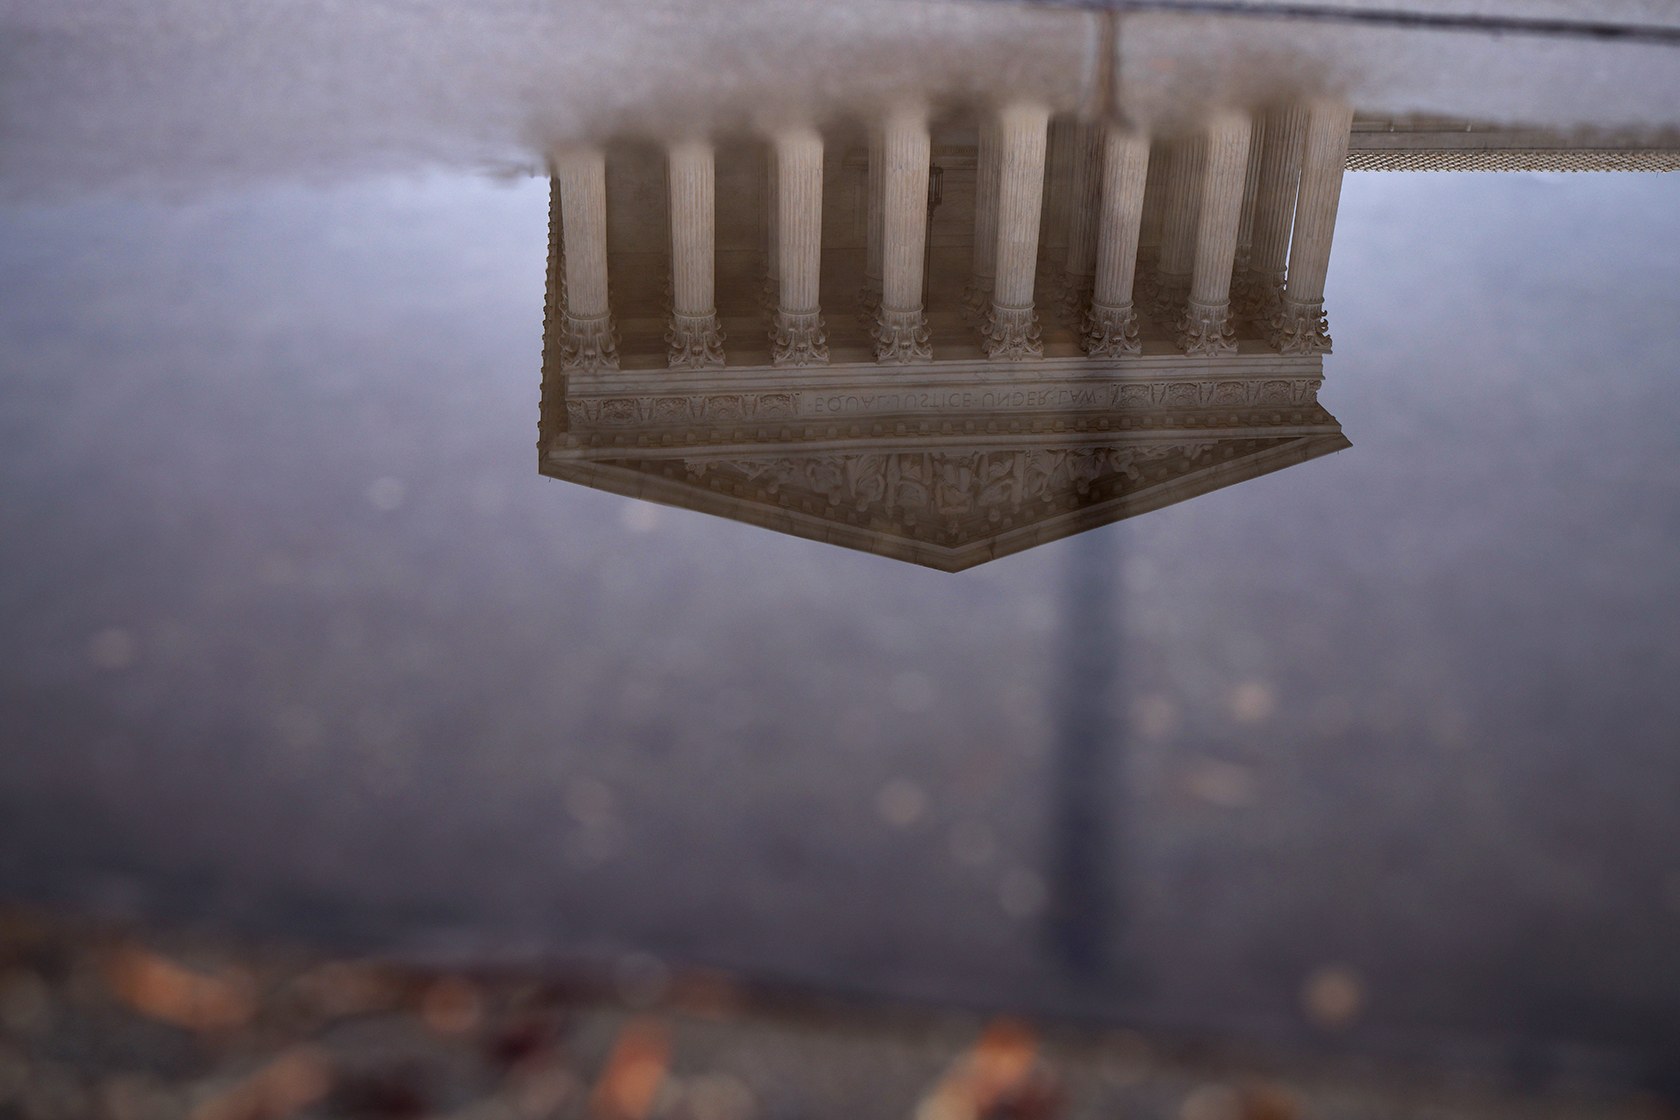 The Supreme Court building reflected upside down in puddle